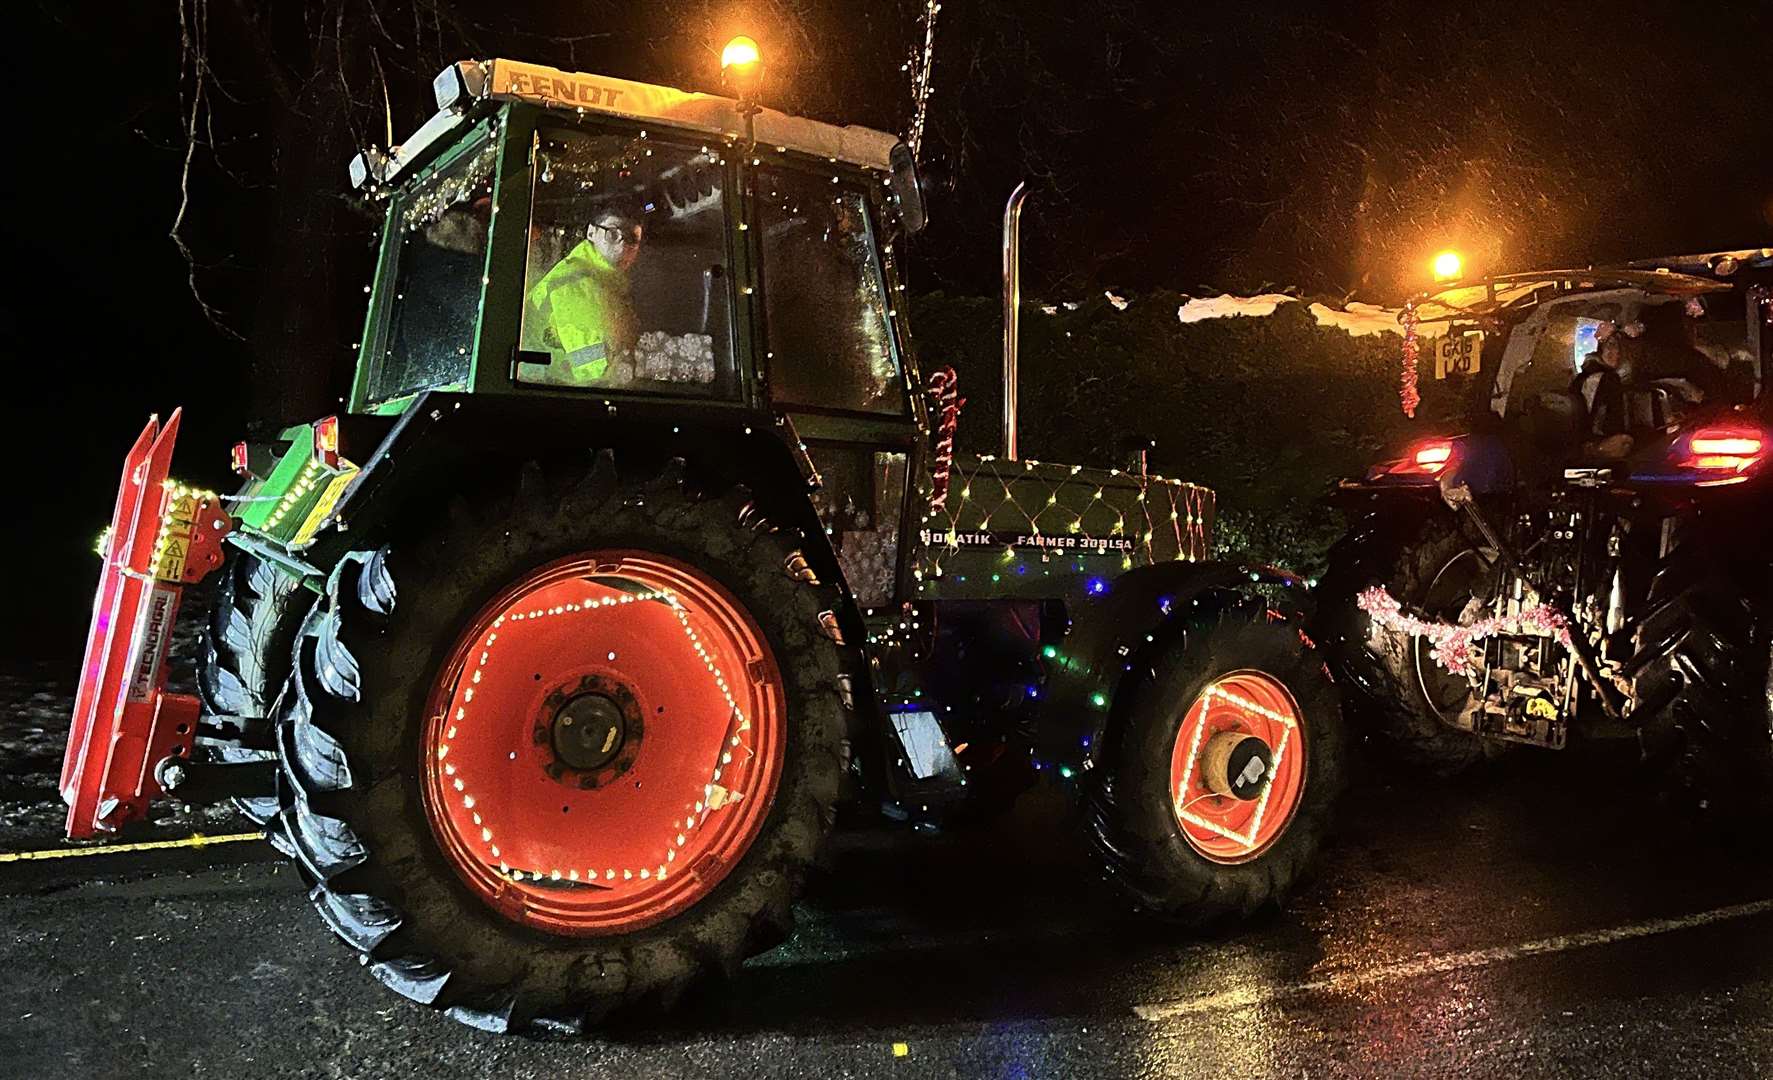 Around 30 tractors took to the roads. Picture: Weald of Kent Young Farmers